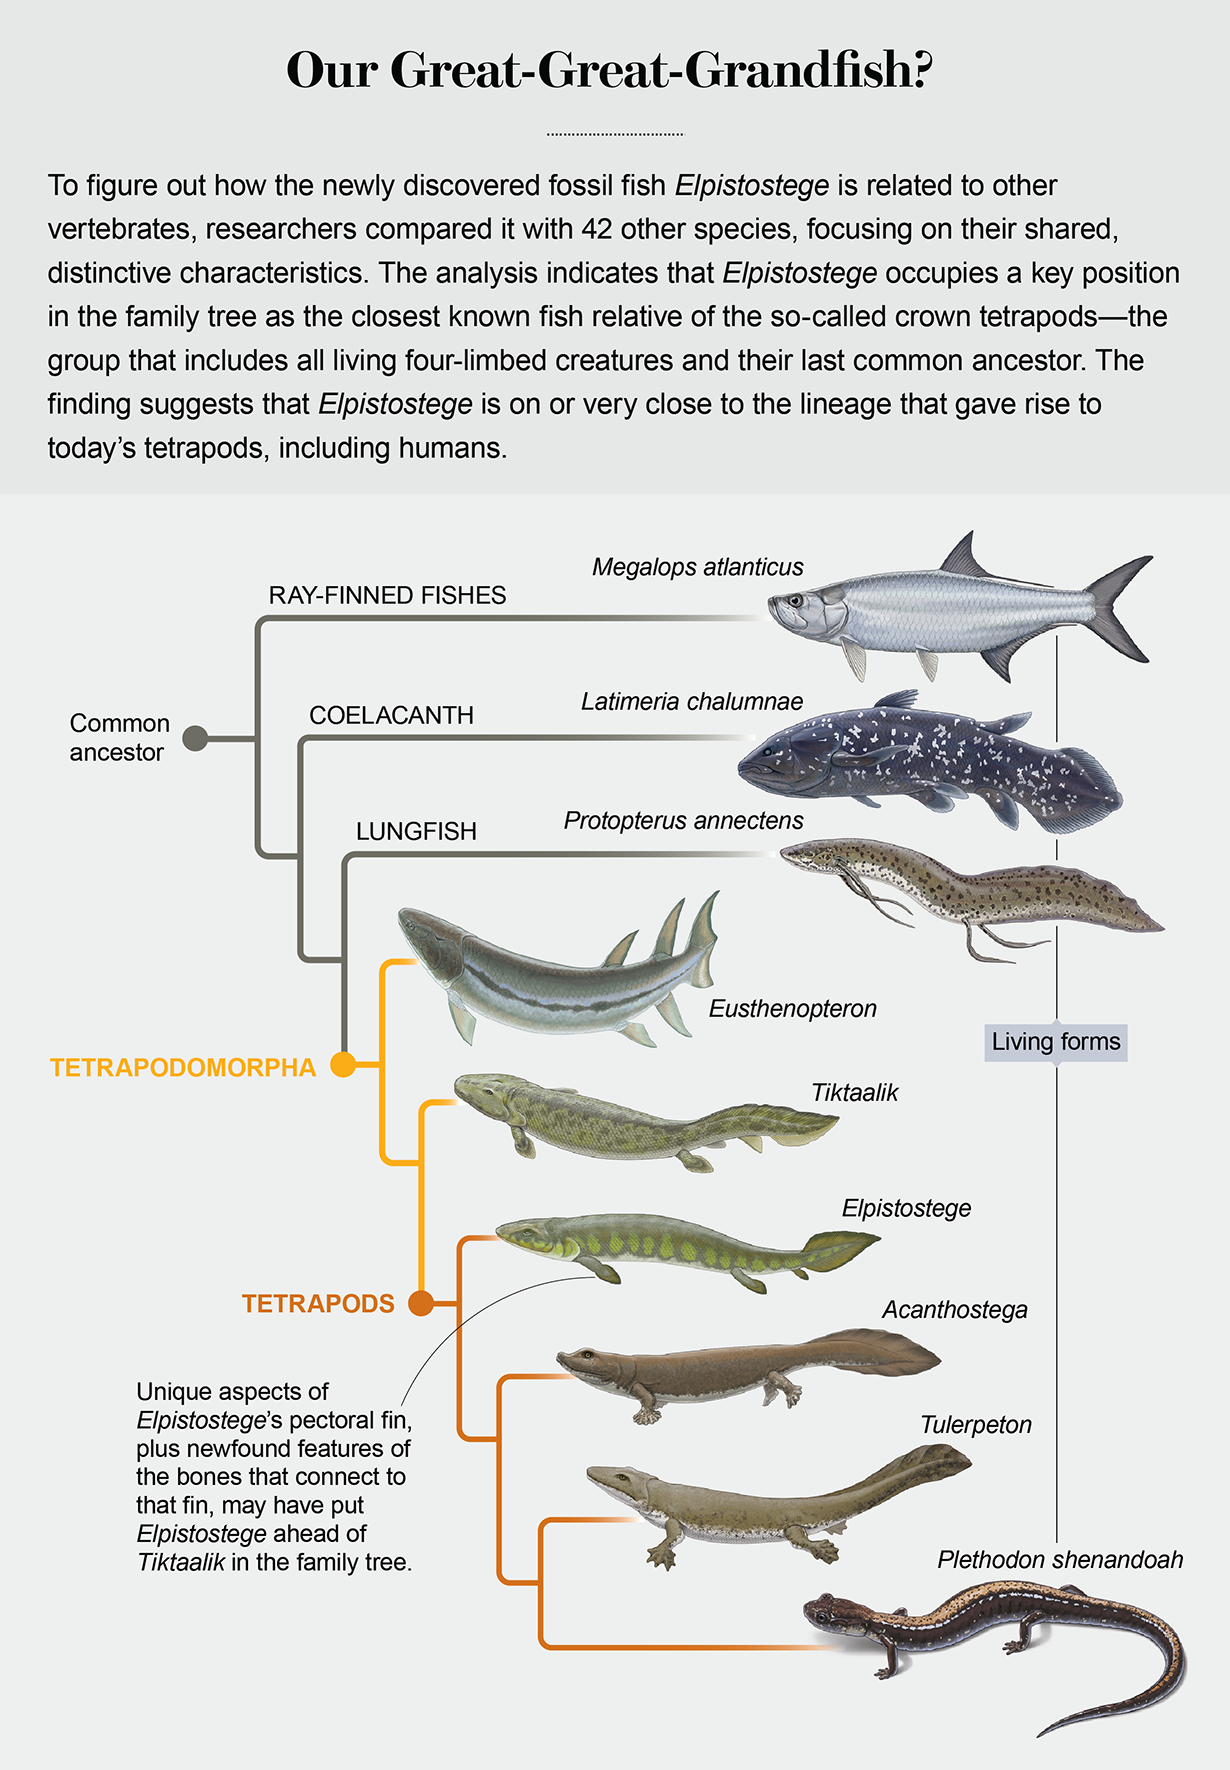 Did Fish Really Invent Themselves?